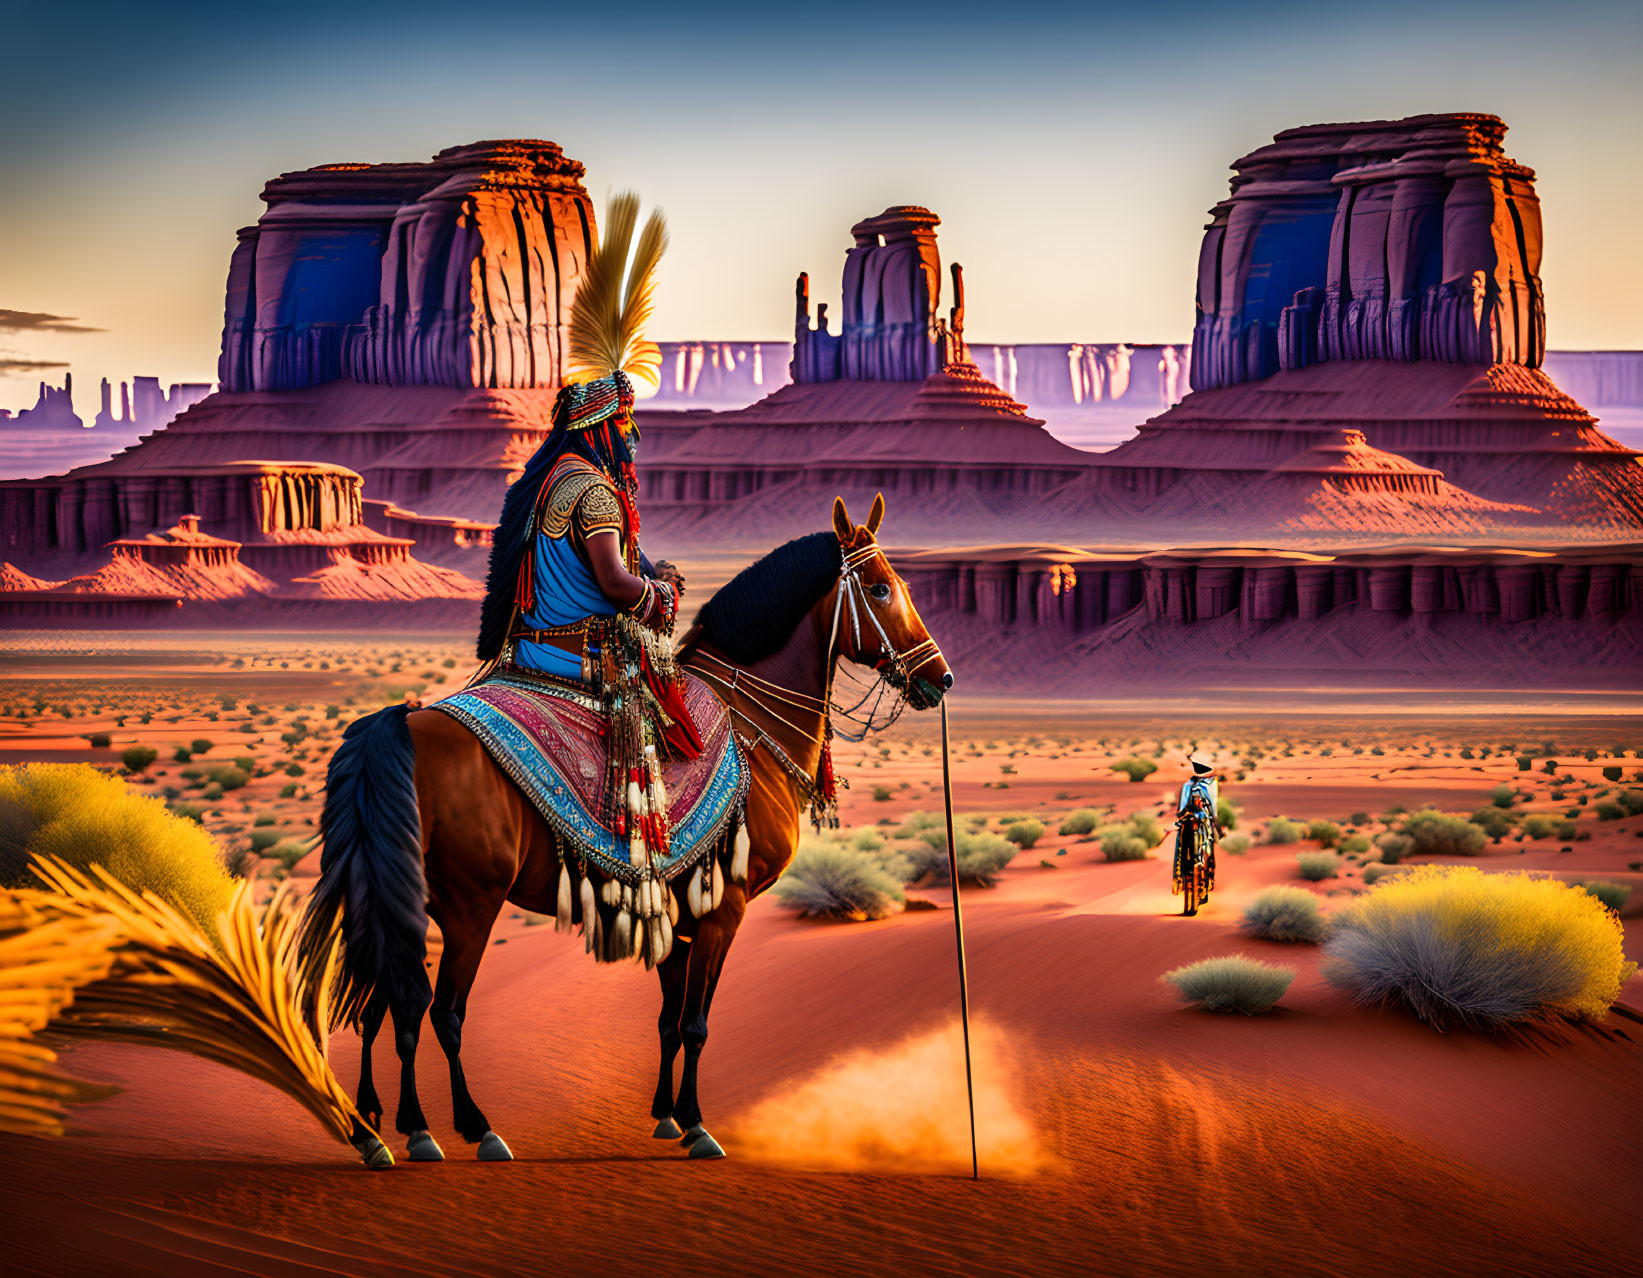 Native American rider on horse in desert with red sandstone buttes and cyclist